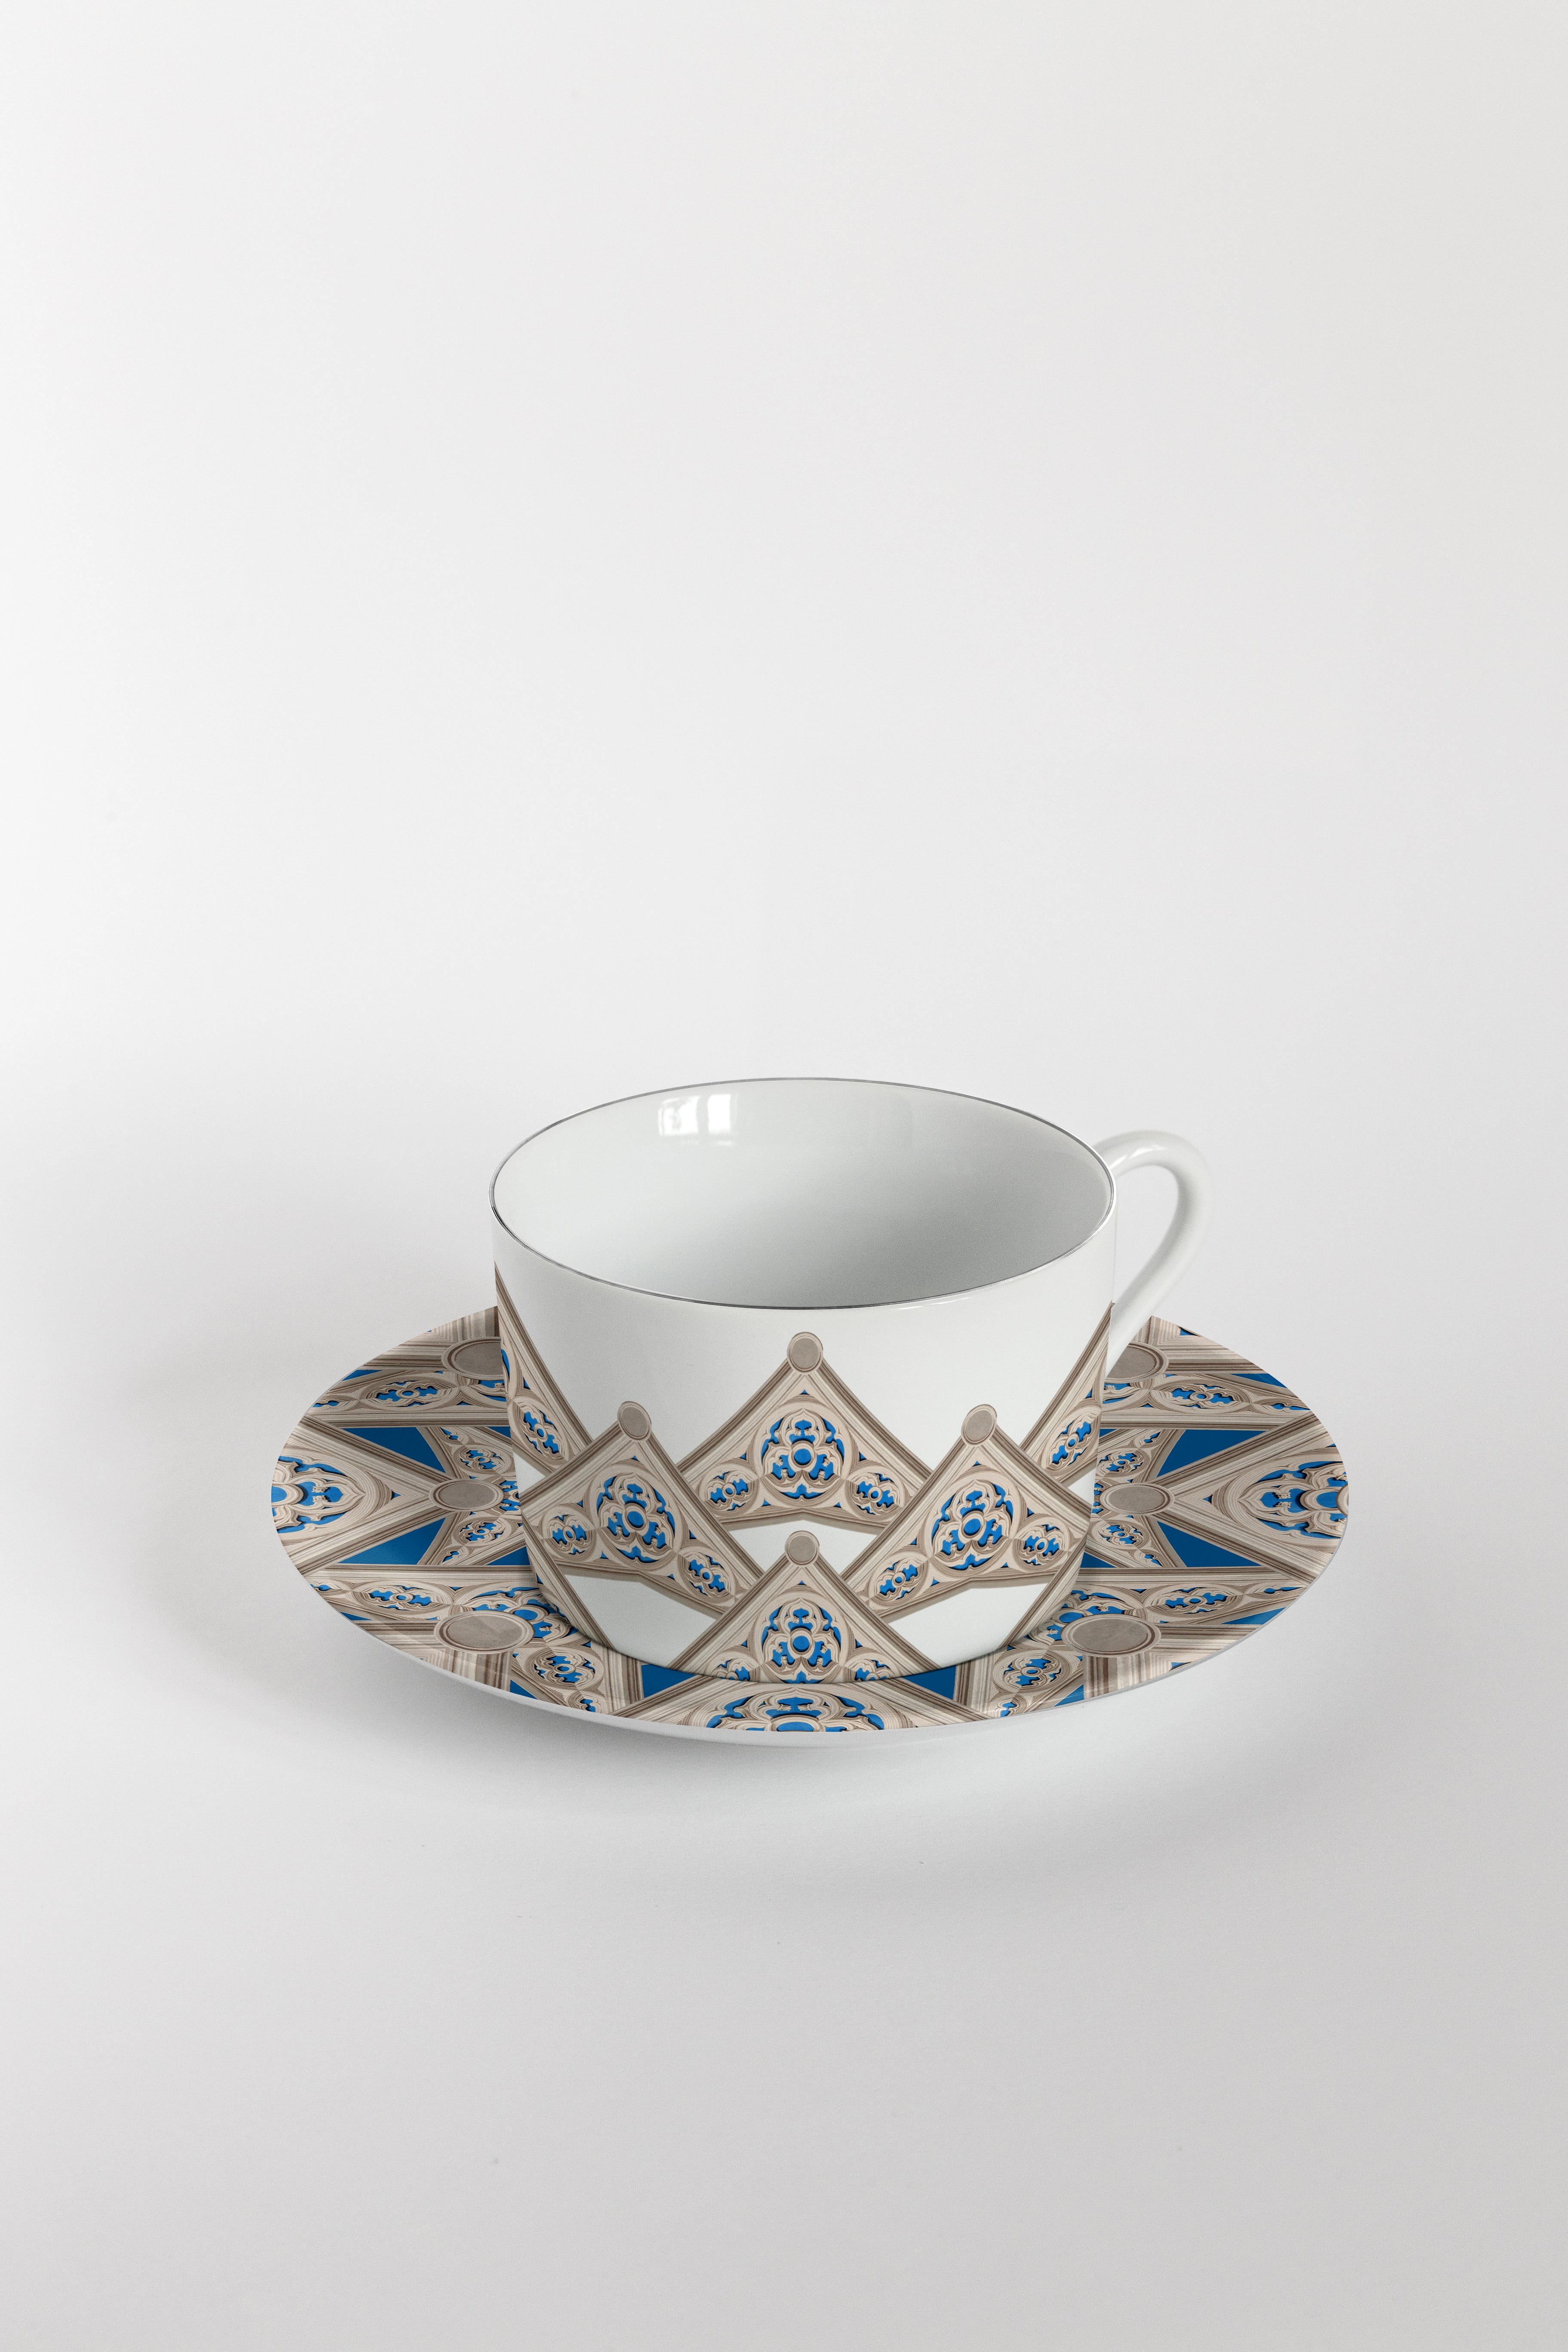 Le Volte Celesti, Six Contemporary Decorated Tea Cups with Plates In New Condition For Sale In Milano, Lombardia